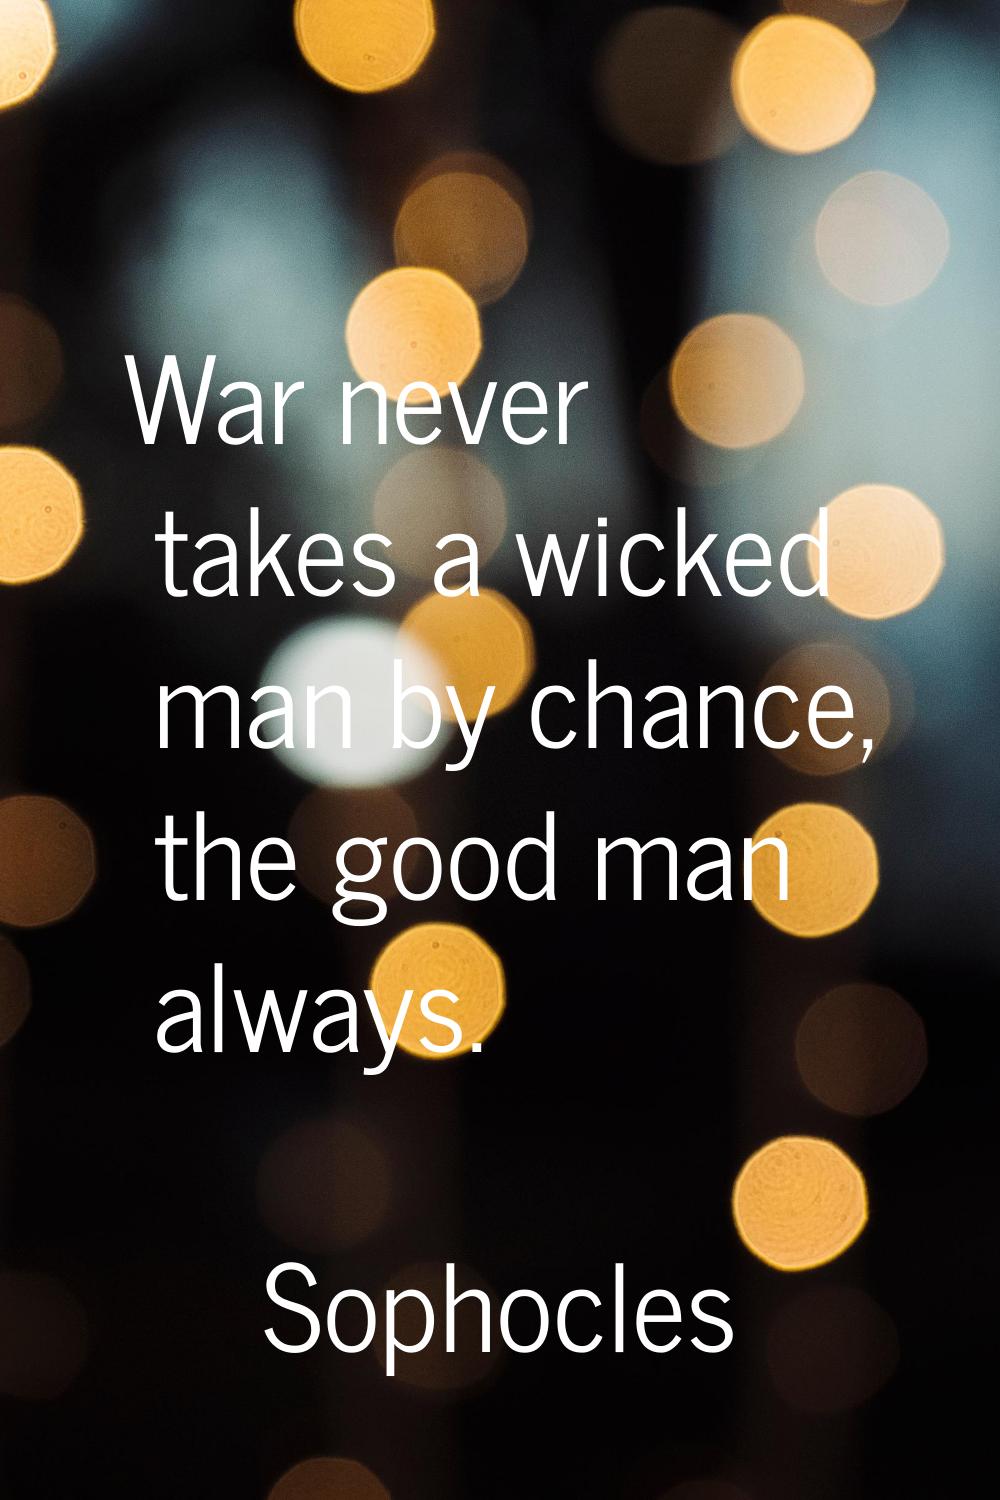 War never takes a wicked man by chance, the good man always.